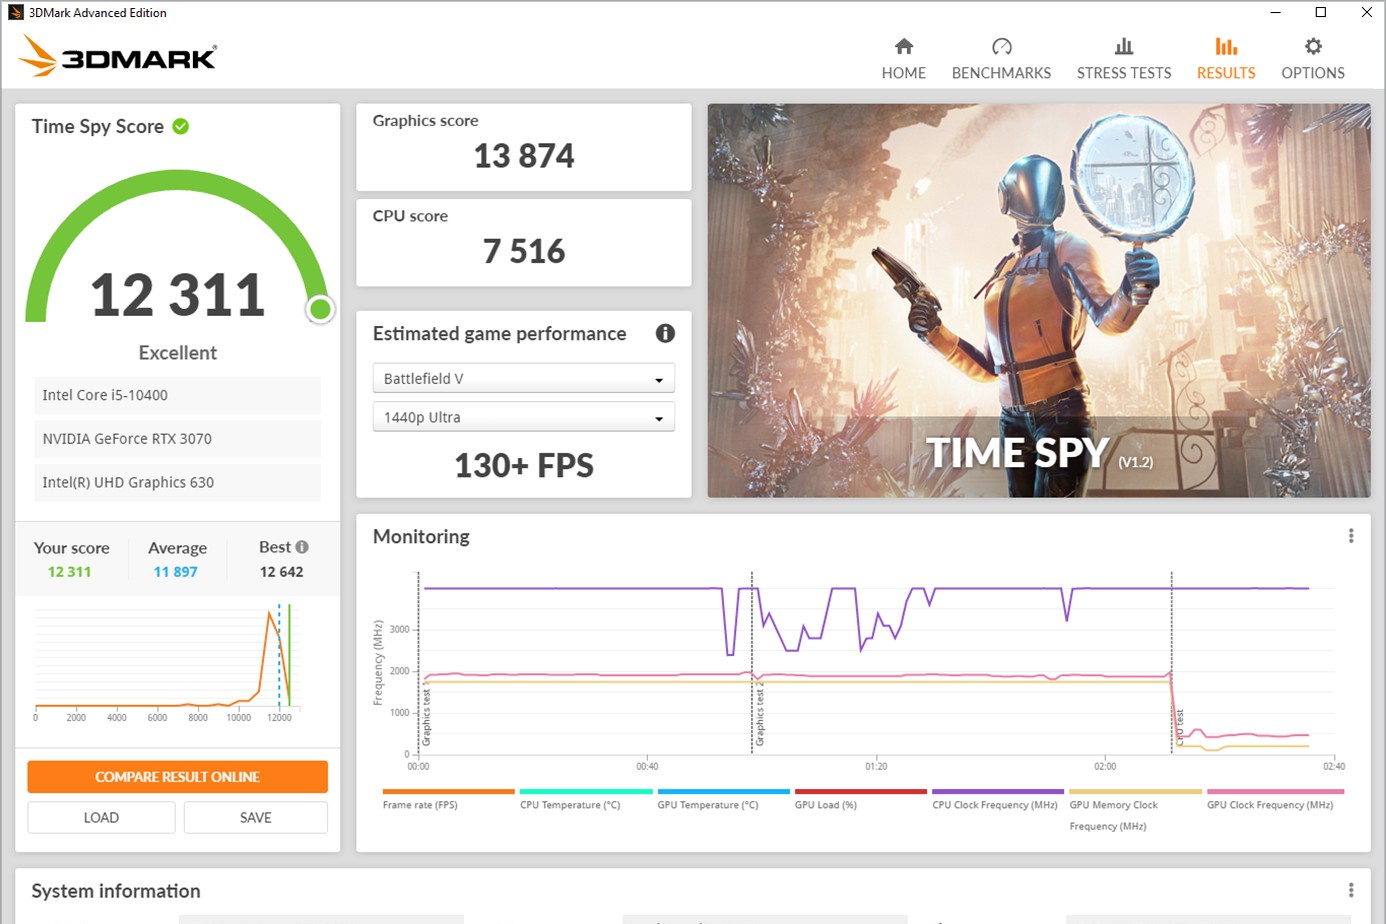 3DMark's Time Spy results dashboard.